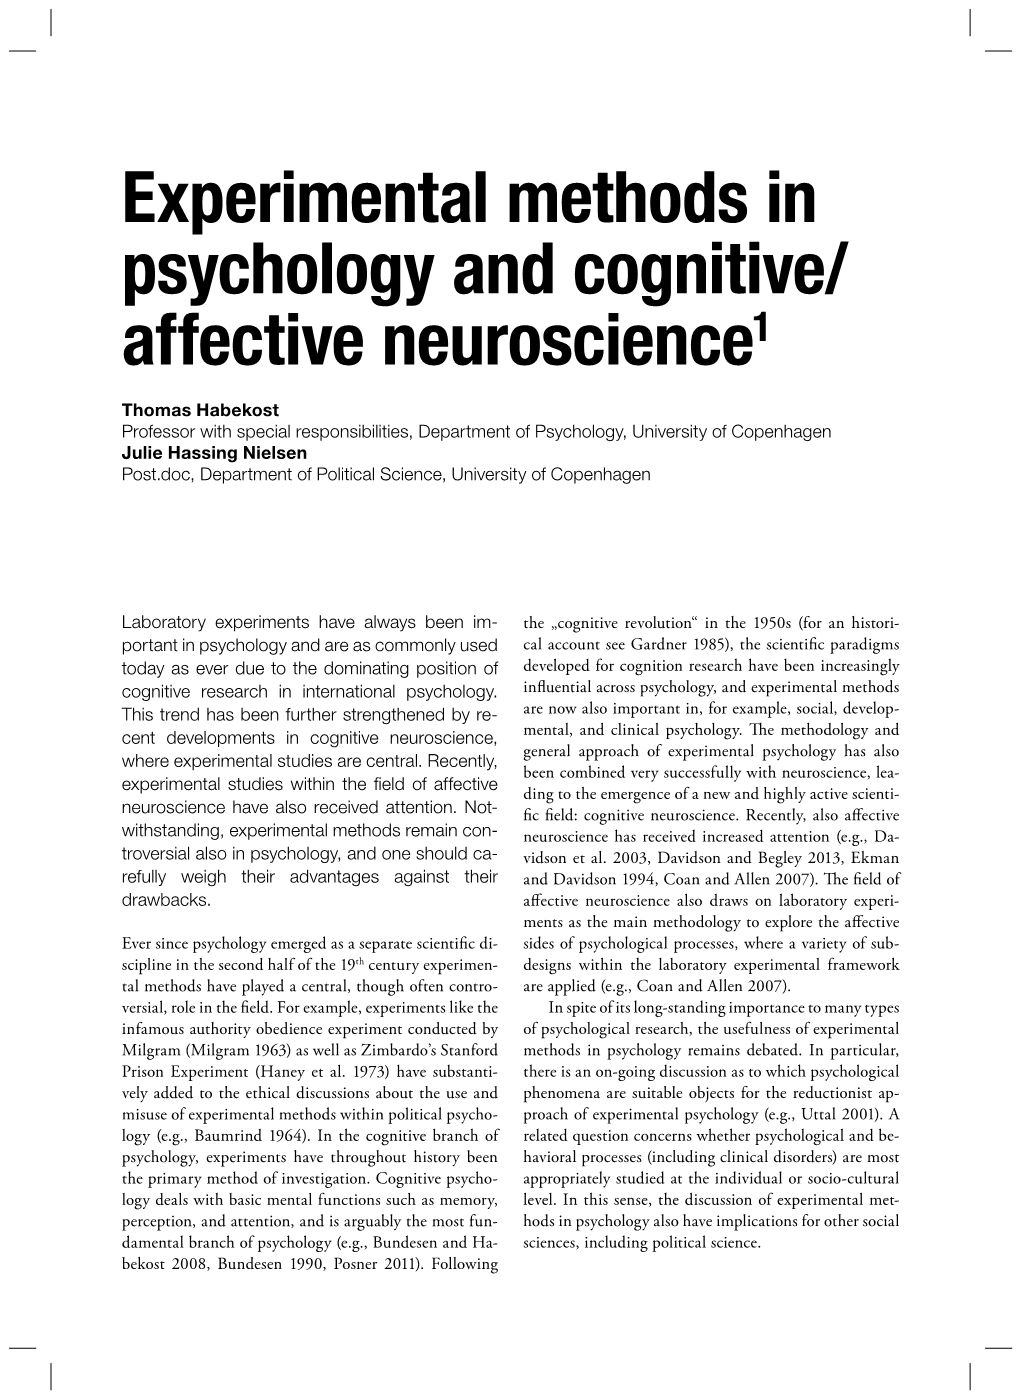 Experimental Methods in Psychology and Cognitive/ Affective Neuroscience1